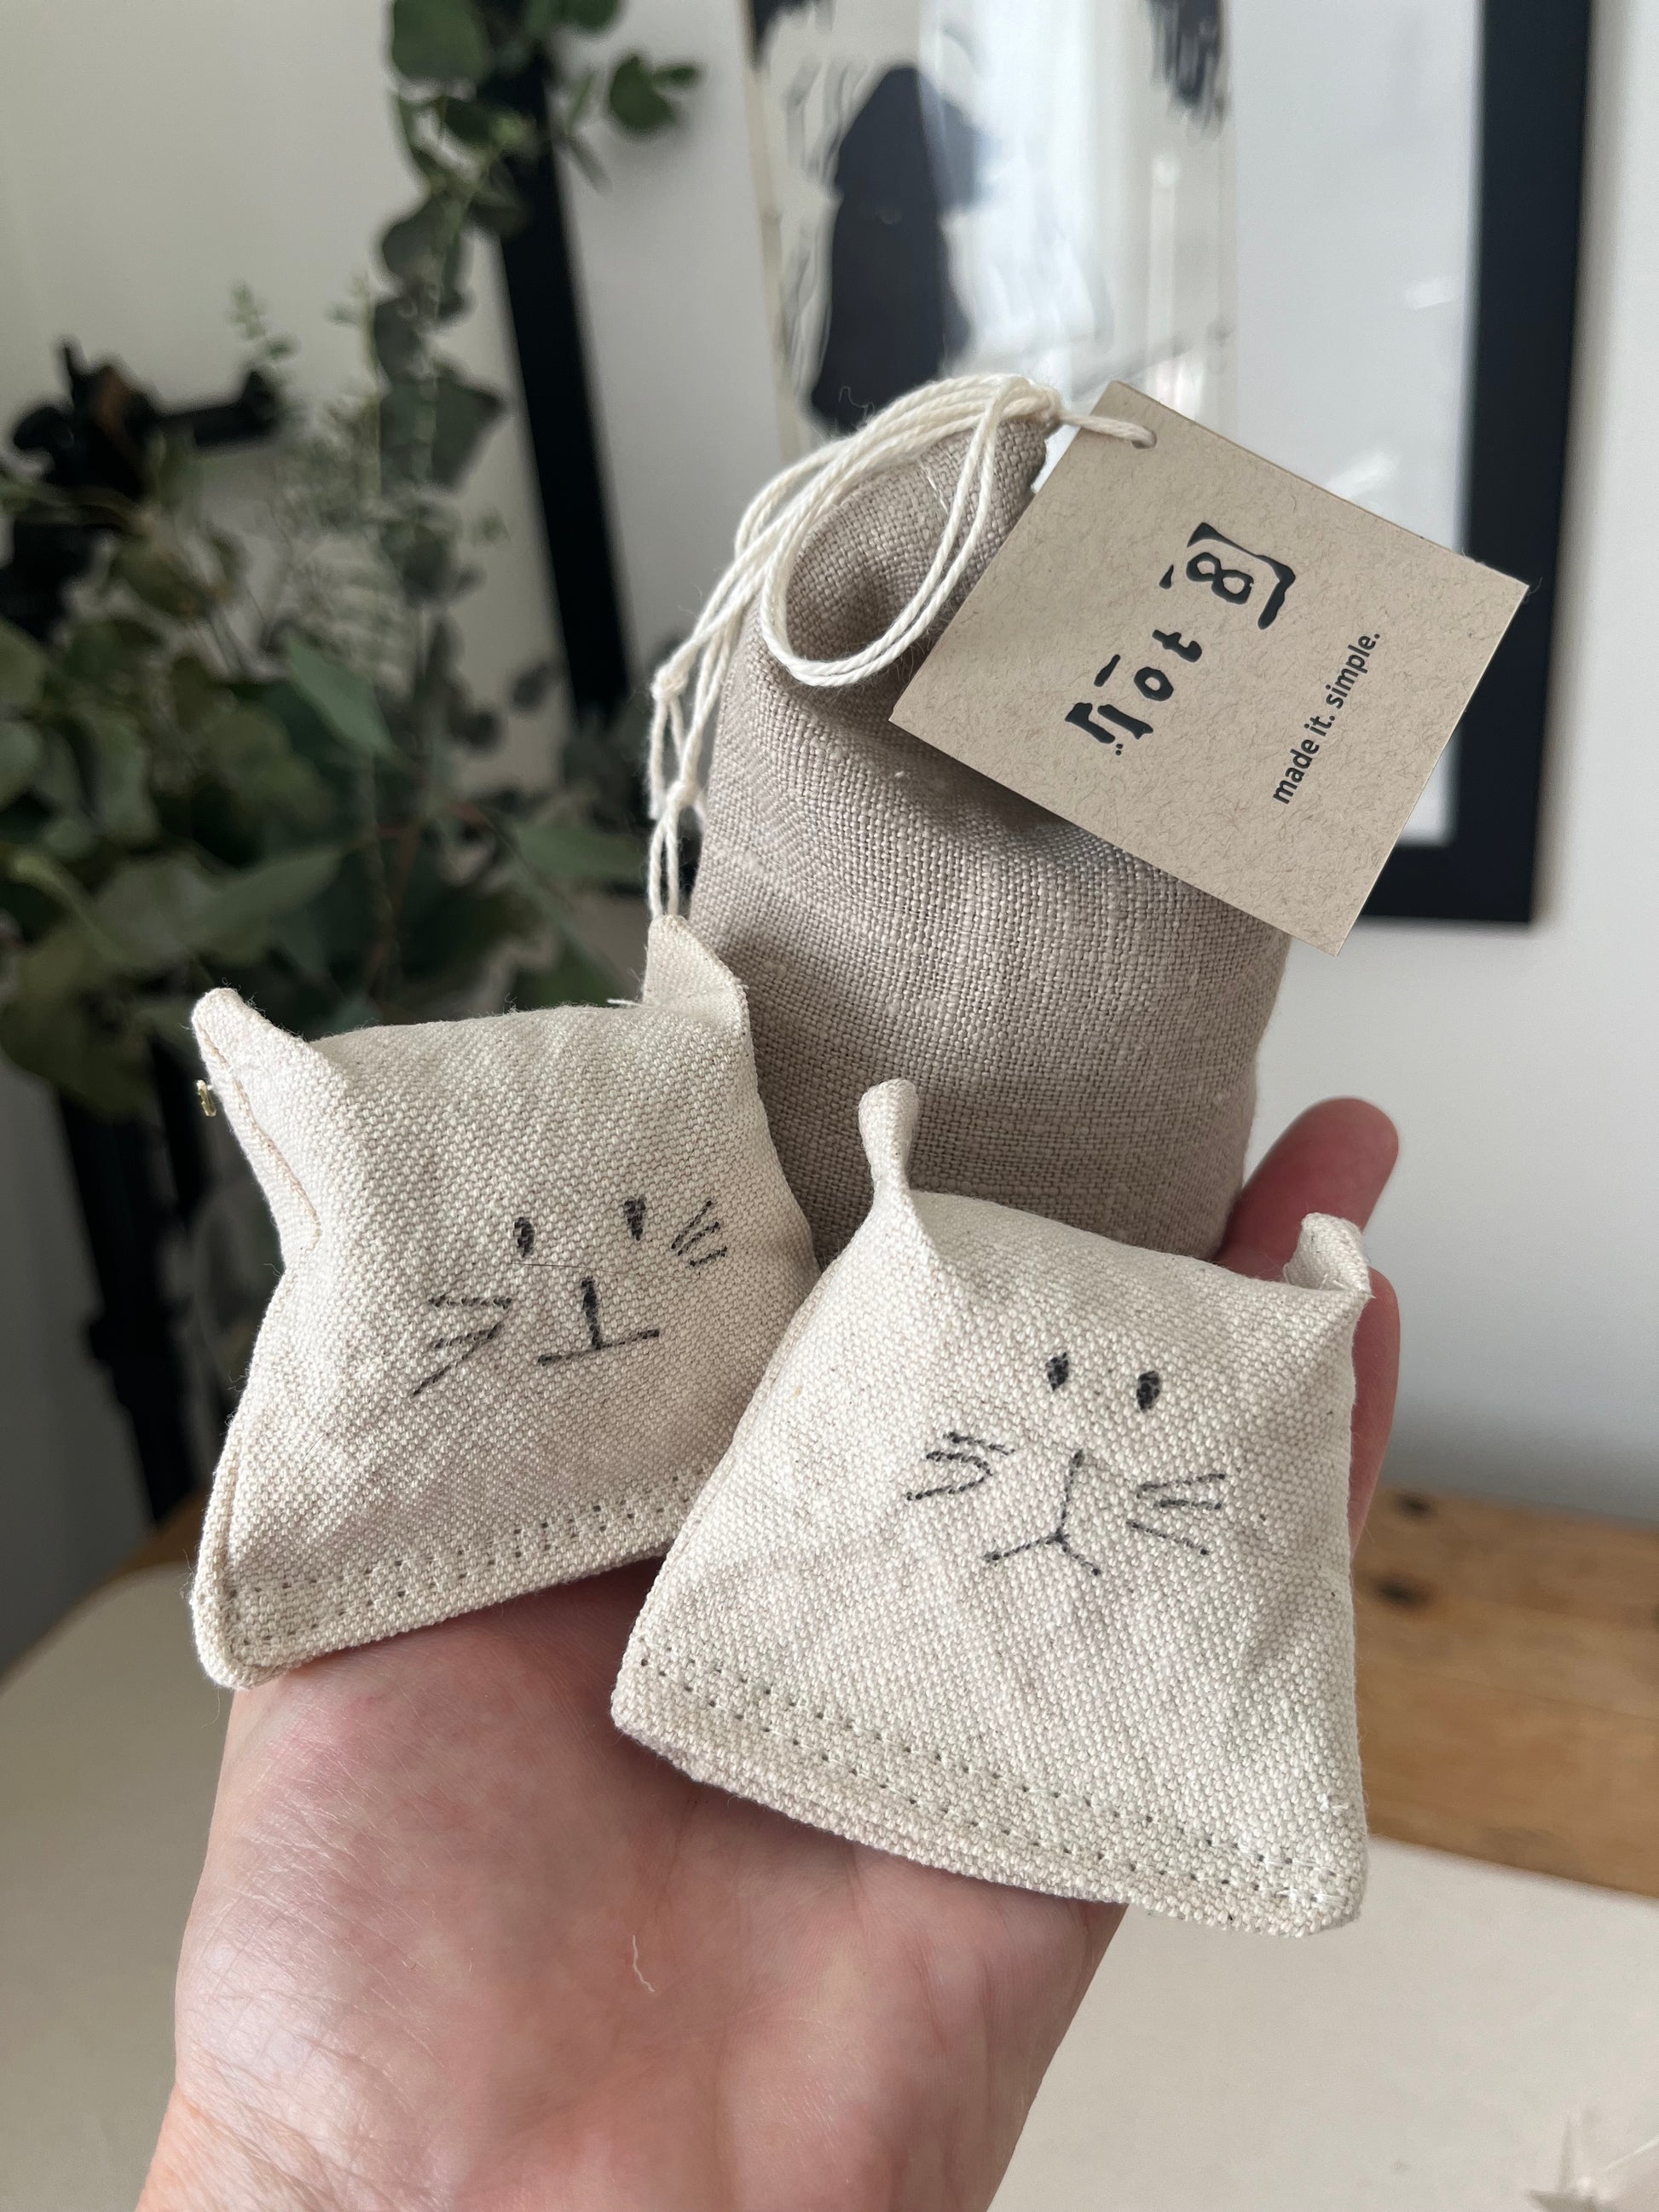 2 all-natural cat toys with adorable drawn cat faces rest in the palm of a hand alongside a linen pouch of cat grass seed. A framed image of the silhouette of a woman and a vase of eucalyptus is in the background. 